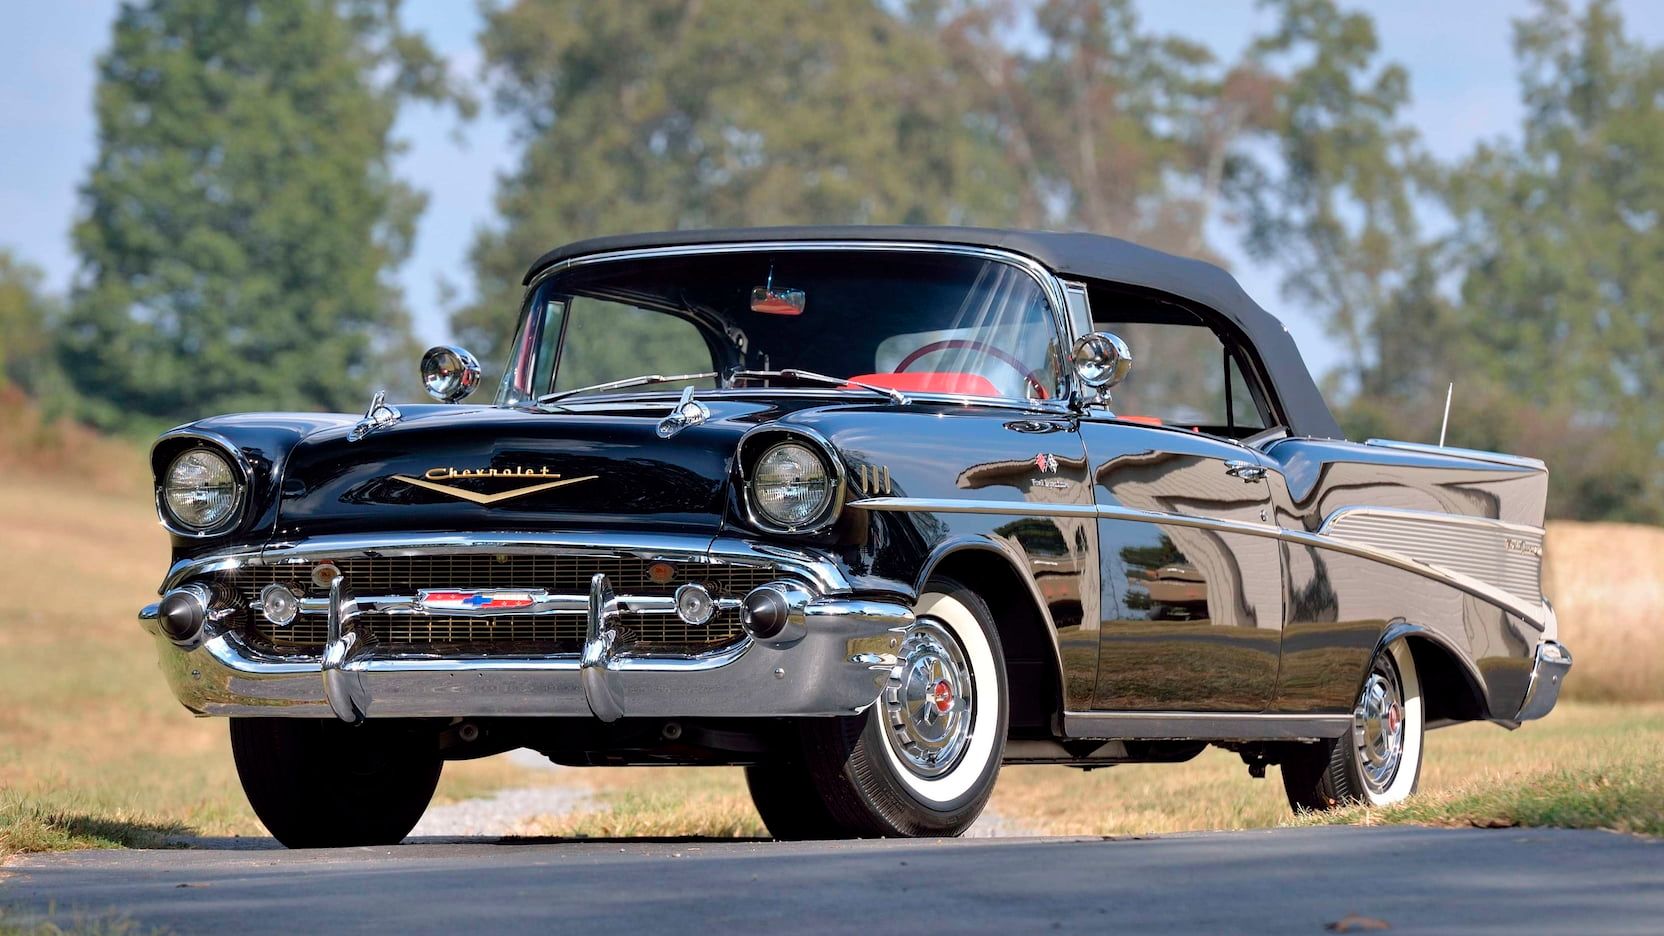 The 1957 Chevrolet Bel-Air at an auction